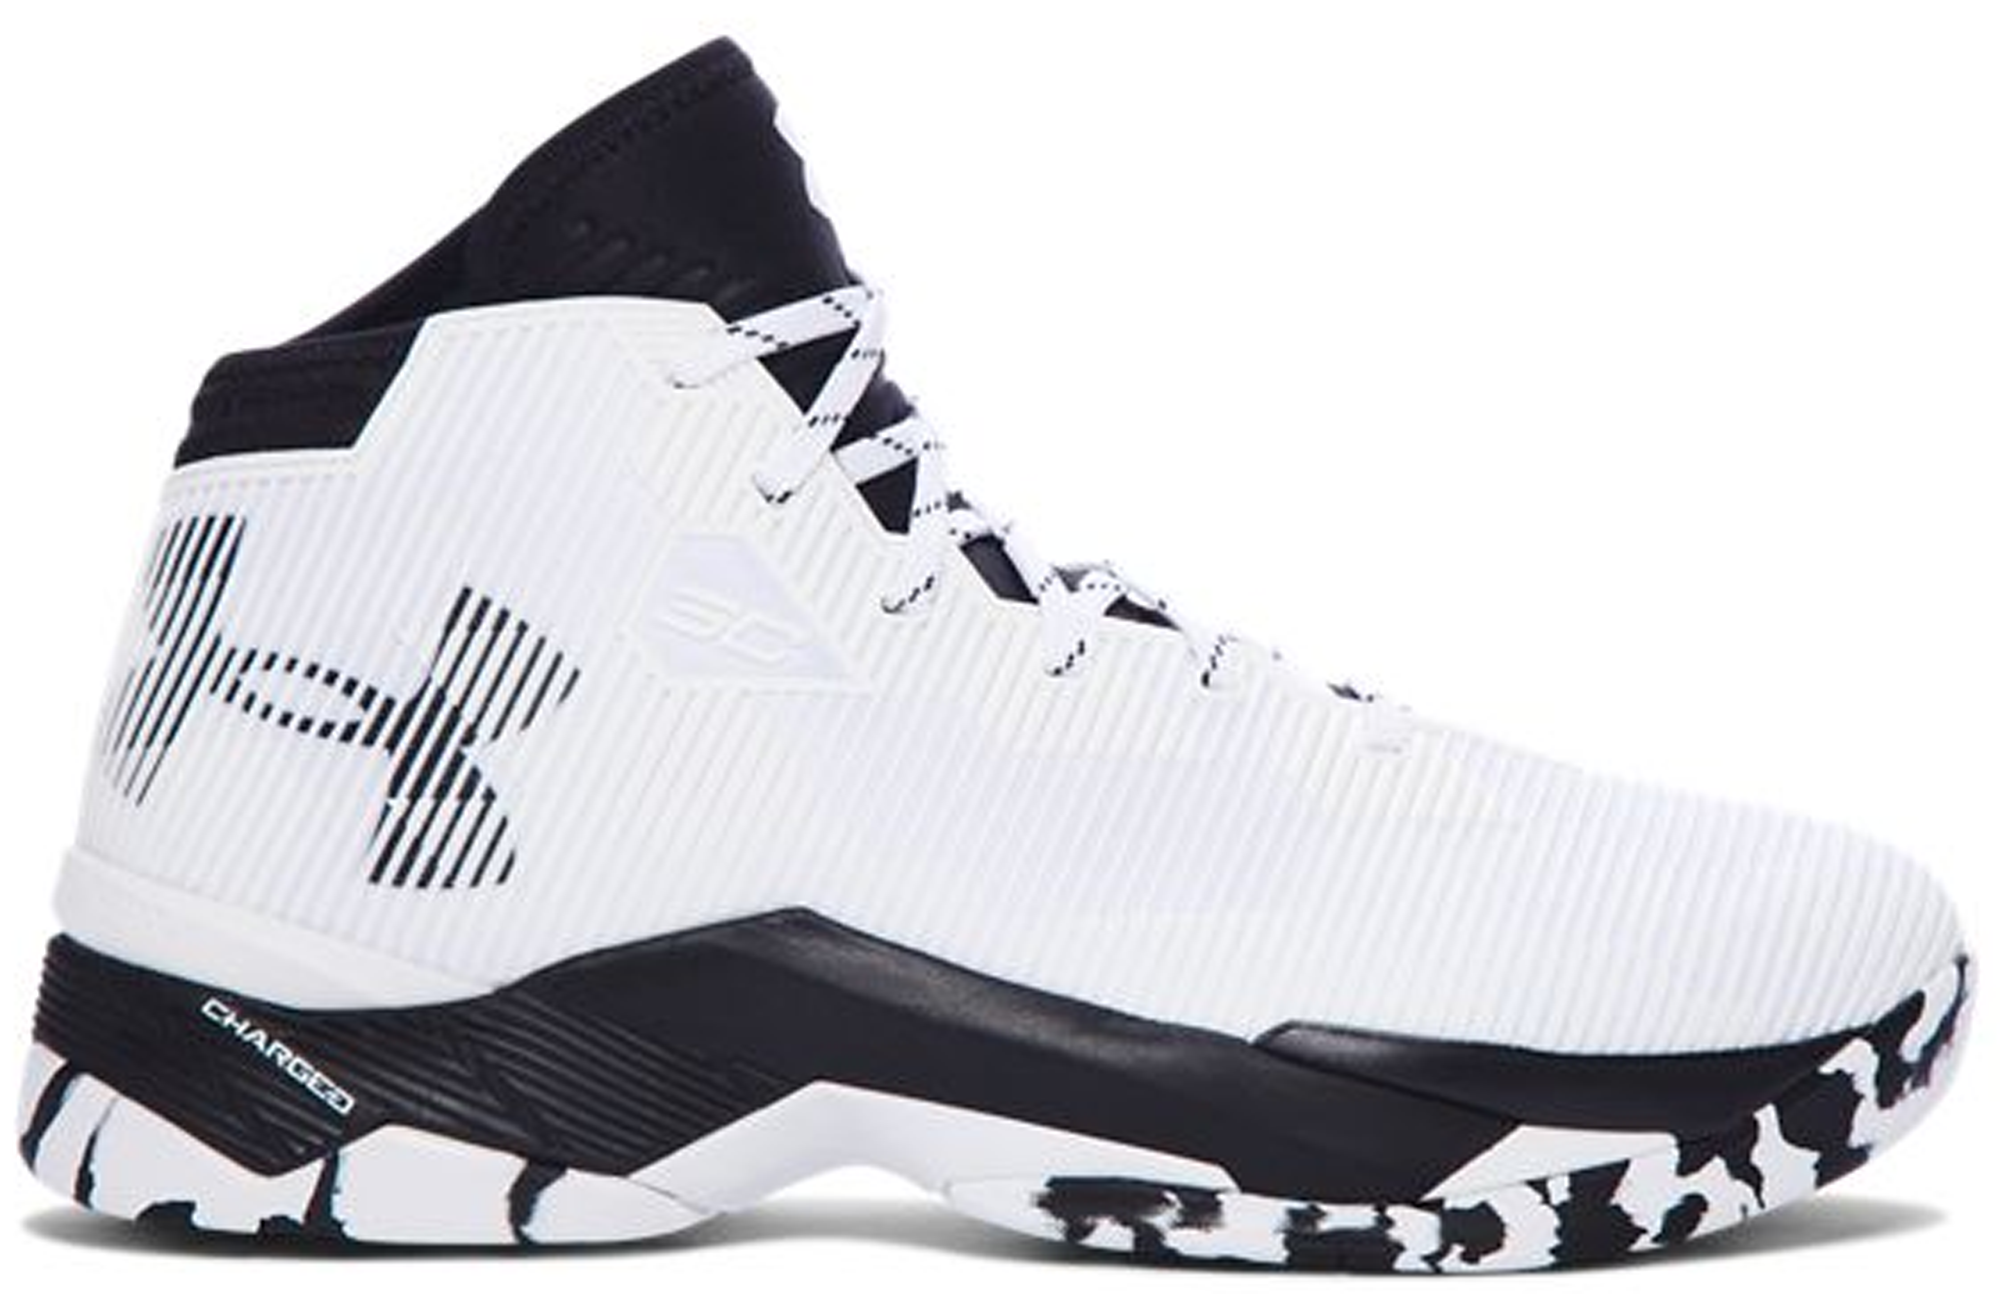 Under Armour Curry 2.5 White Black 